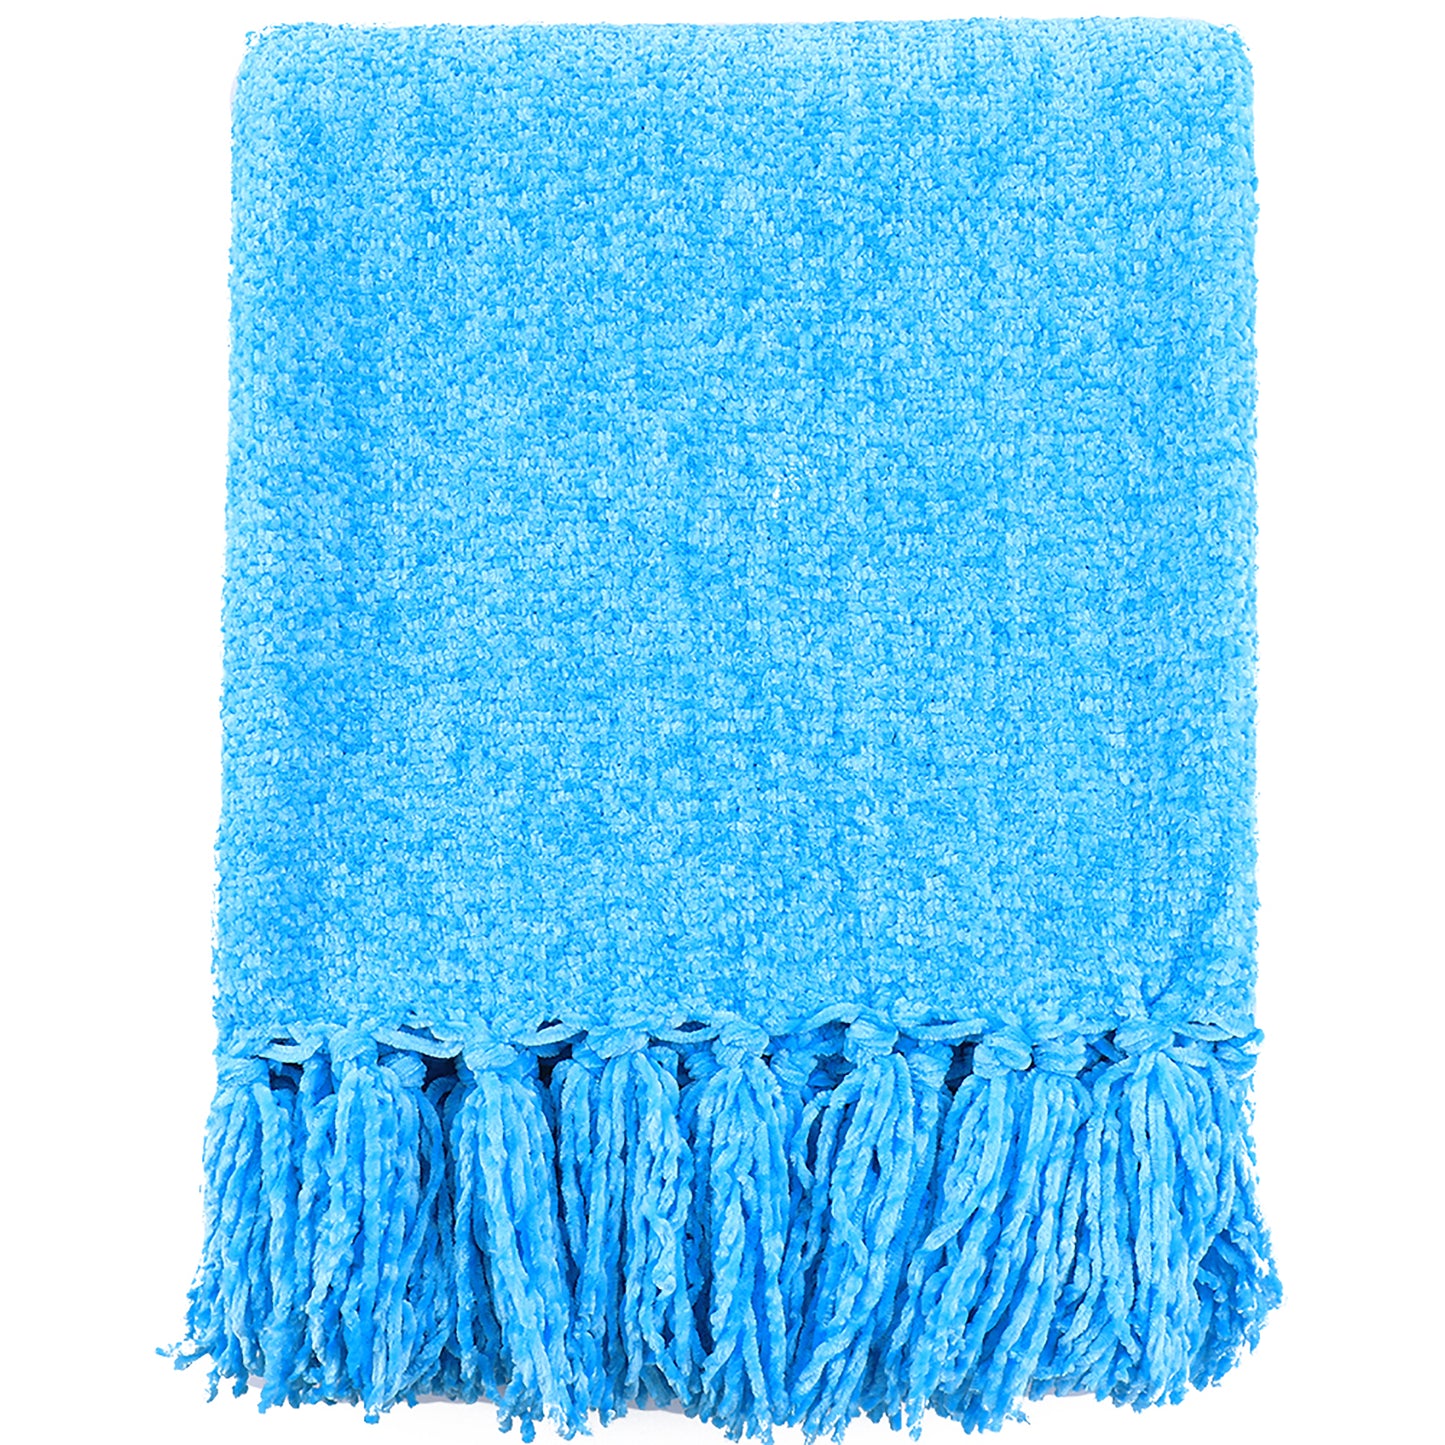 Knitted Throw Blanket Fringe Dusty Slate Light Light Blue Decorative Tassel Boho Decor Couch Bed Sofa Fall Outdoor Woven Textured Lightweight